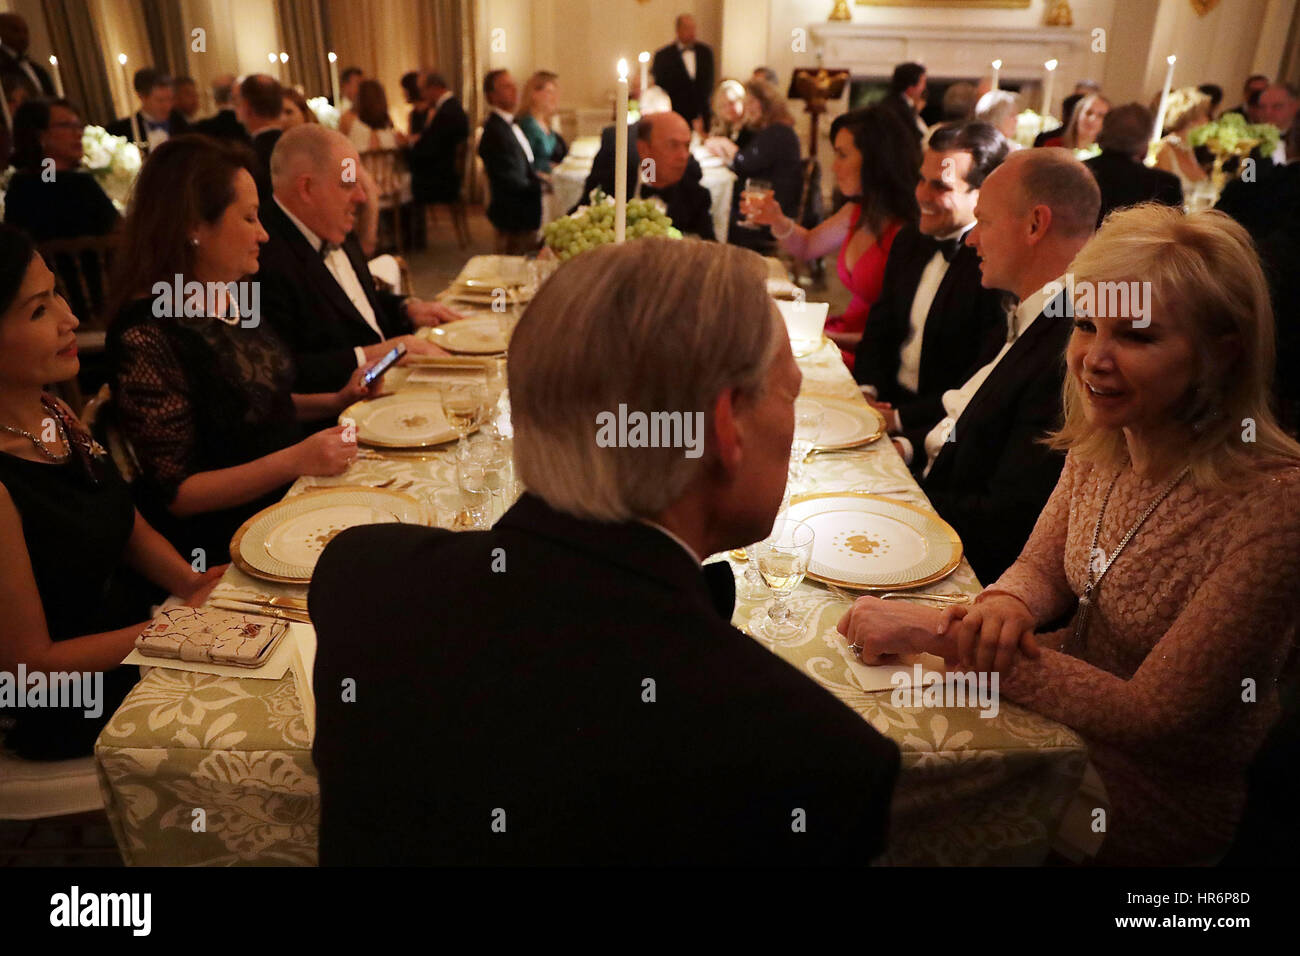 Washington, DC, USA. 26th Feb, 2017. Texas Governor Greg Abbott (back to camera), Maryland Governor Larry Hogan and other sit together during the annual Governors Dinner in the East Room of the White House February 26, 2017 in Washington, DC, USA. Part of the National Governors Association's annual meeting in the nation's capital, the black tie dinner and ball is the first formal event the Trumps will host at the White House since moving in last month. Credit: dpa picture alliance/Alamy Live News Stock Photo